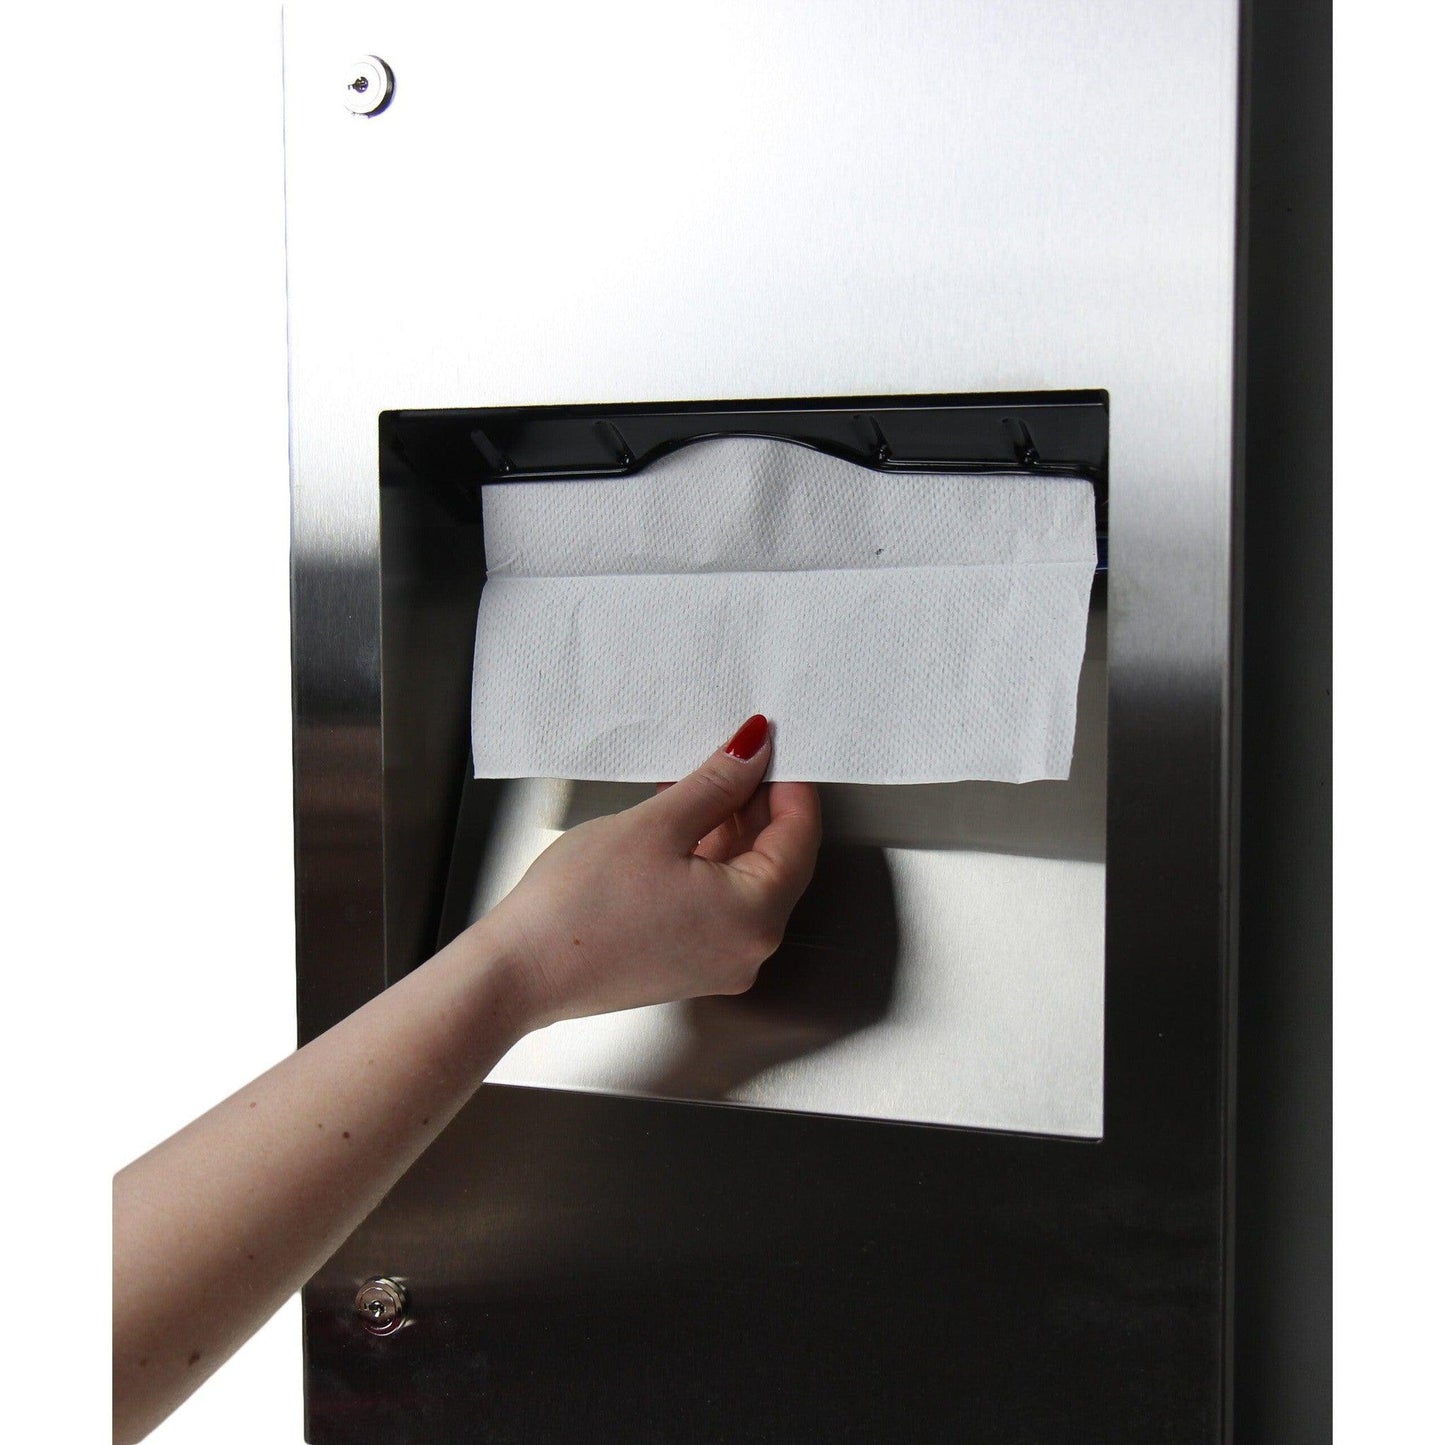 Frost 415-14A Recessed Stainless Steel Paper Dispenser and Disposal